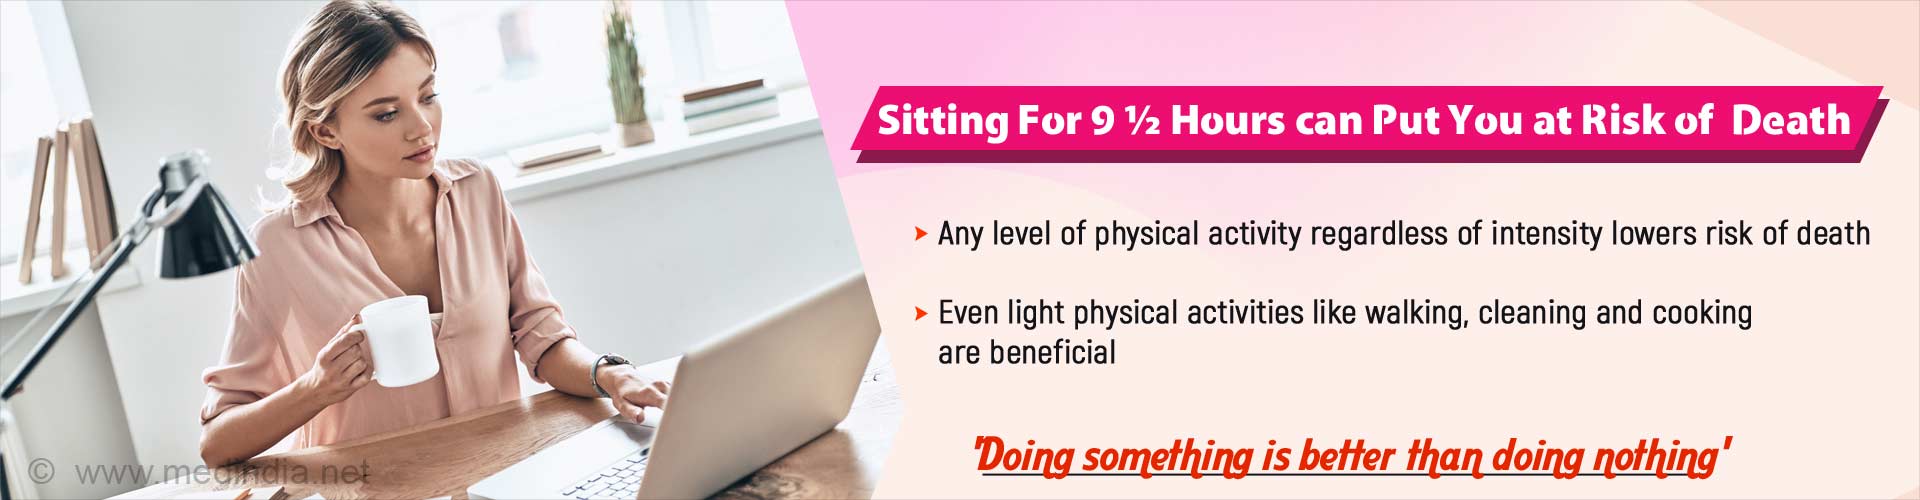 Sitting for 9.5 hours can put you at risk of death. Any level of physical activity regardless of intensity lowers risk of death. Even light physical activities like walking, cleaning and cooking are beneficial. Doing something is better than doing nothing.